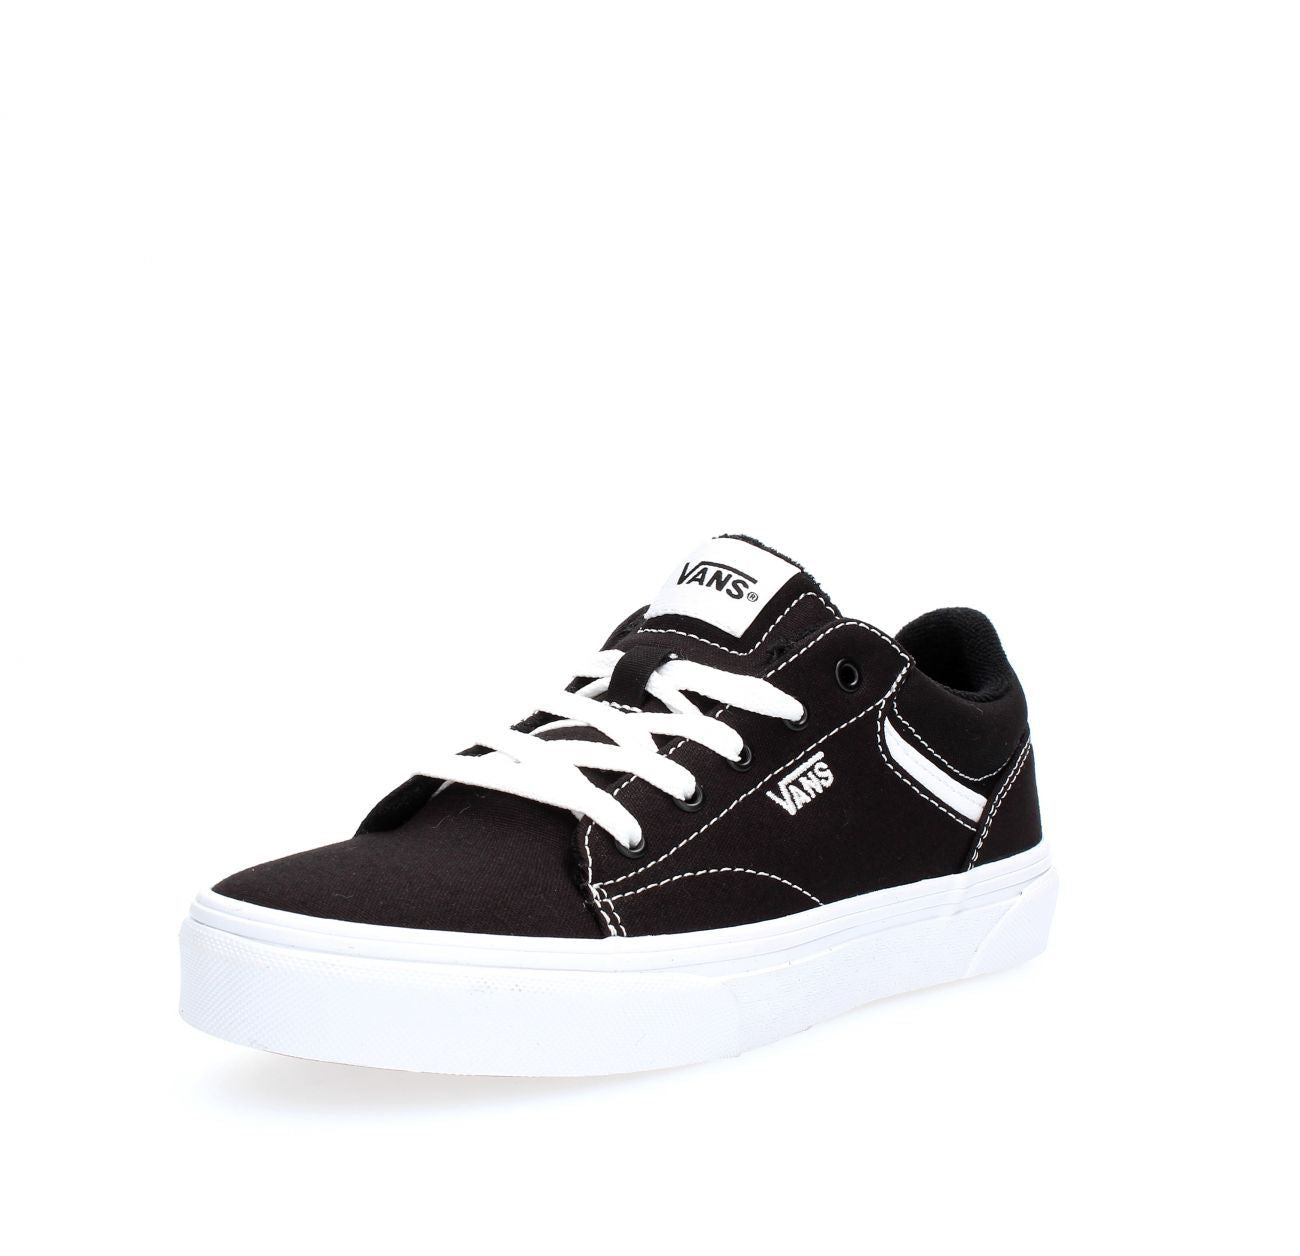 Youths Seldon Canvas Black/White Trainer-Sidw view